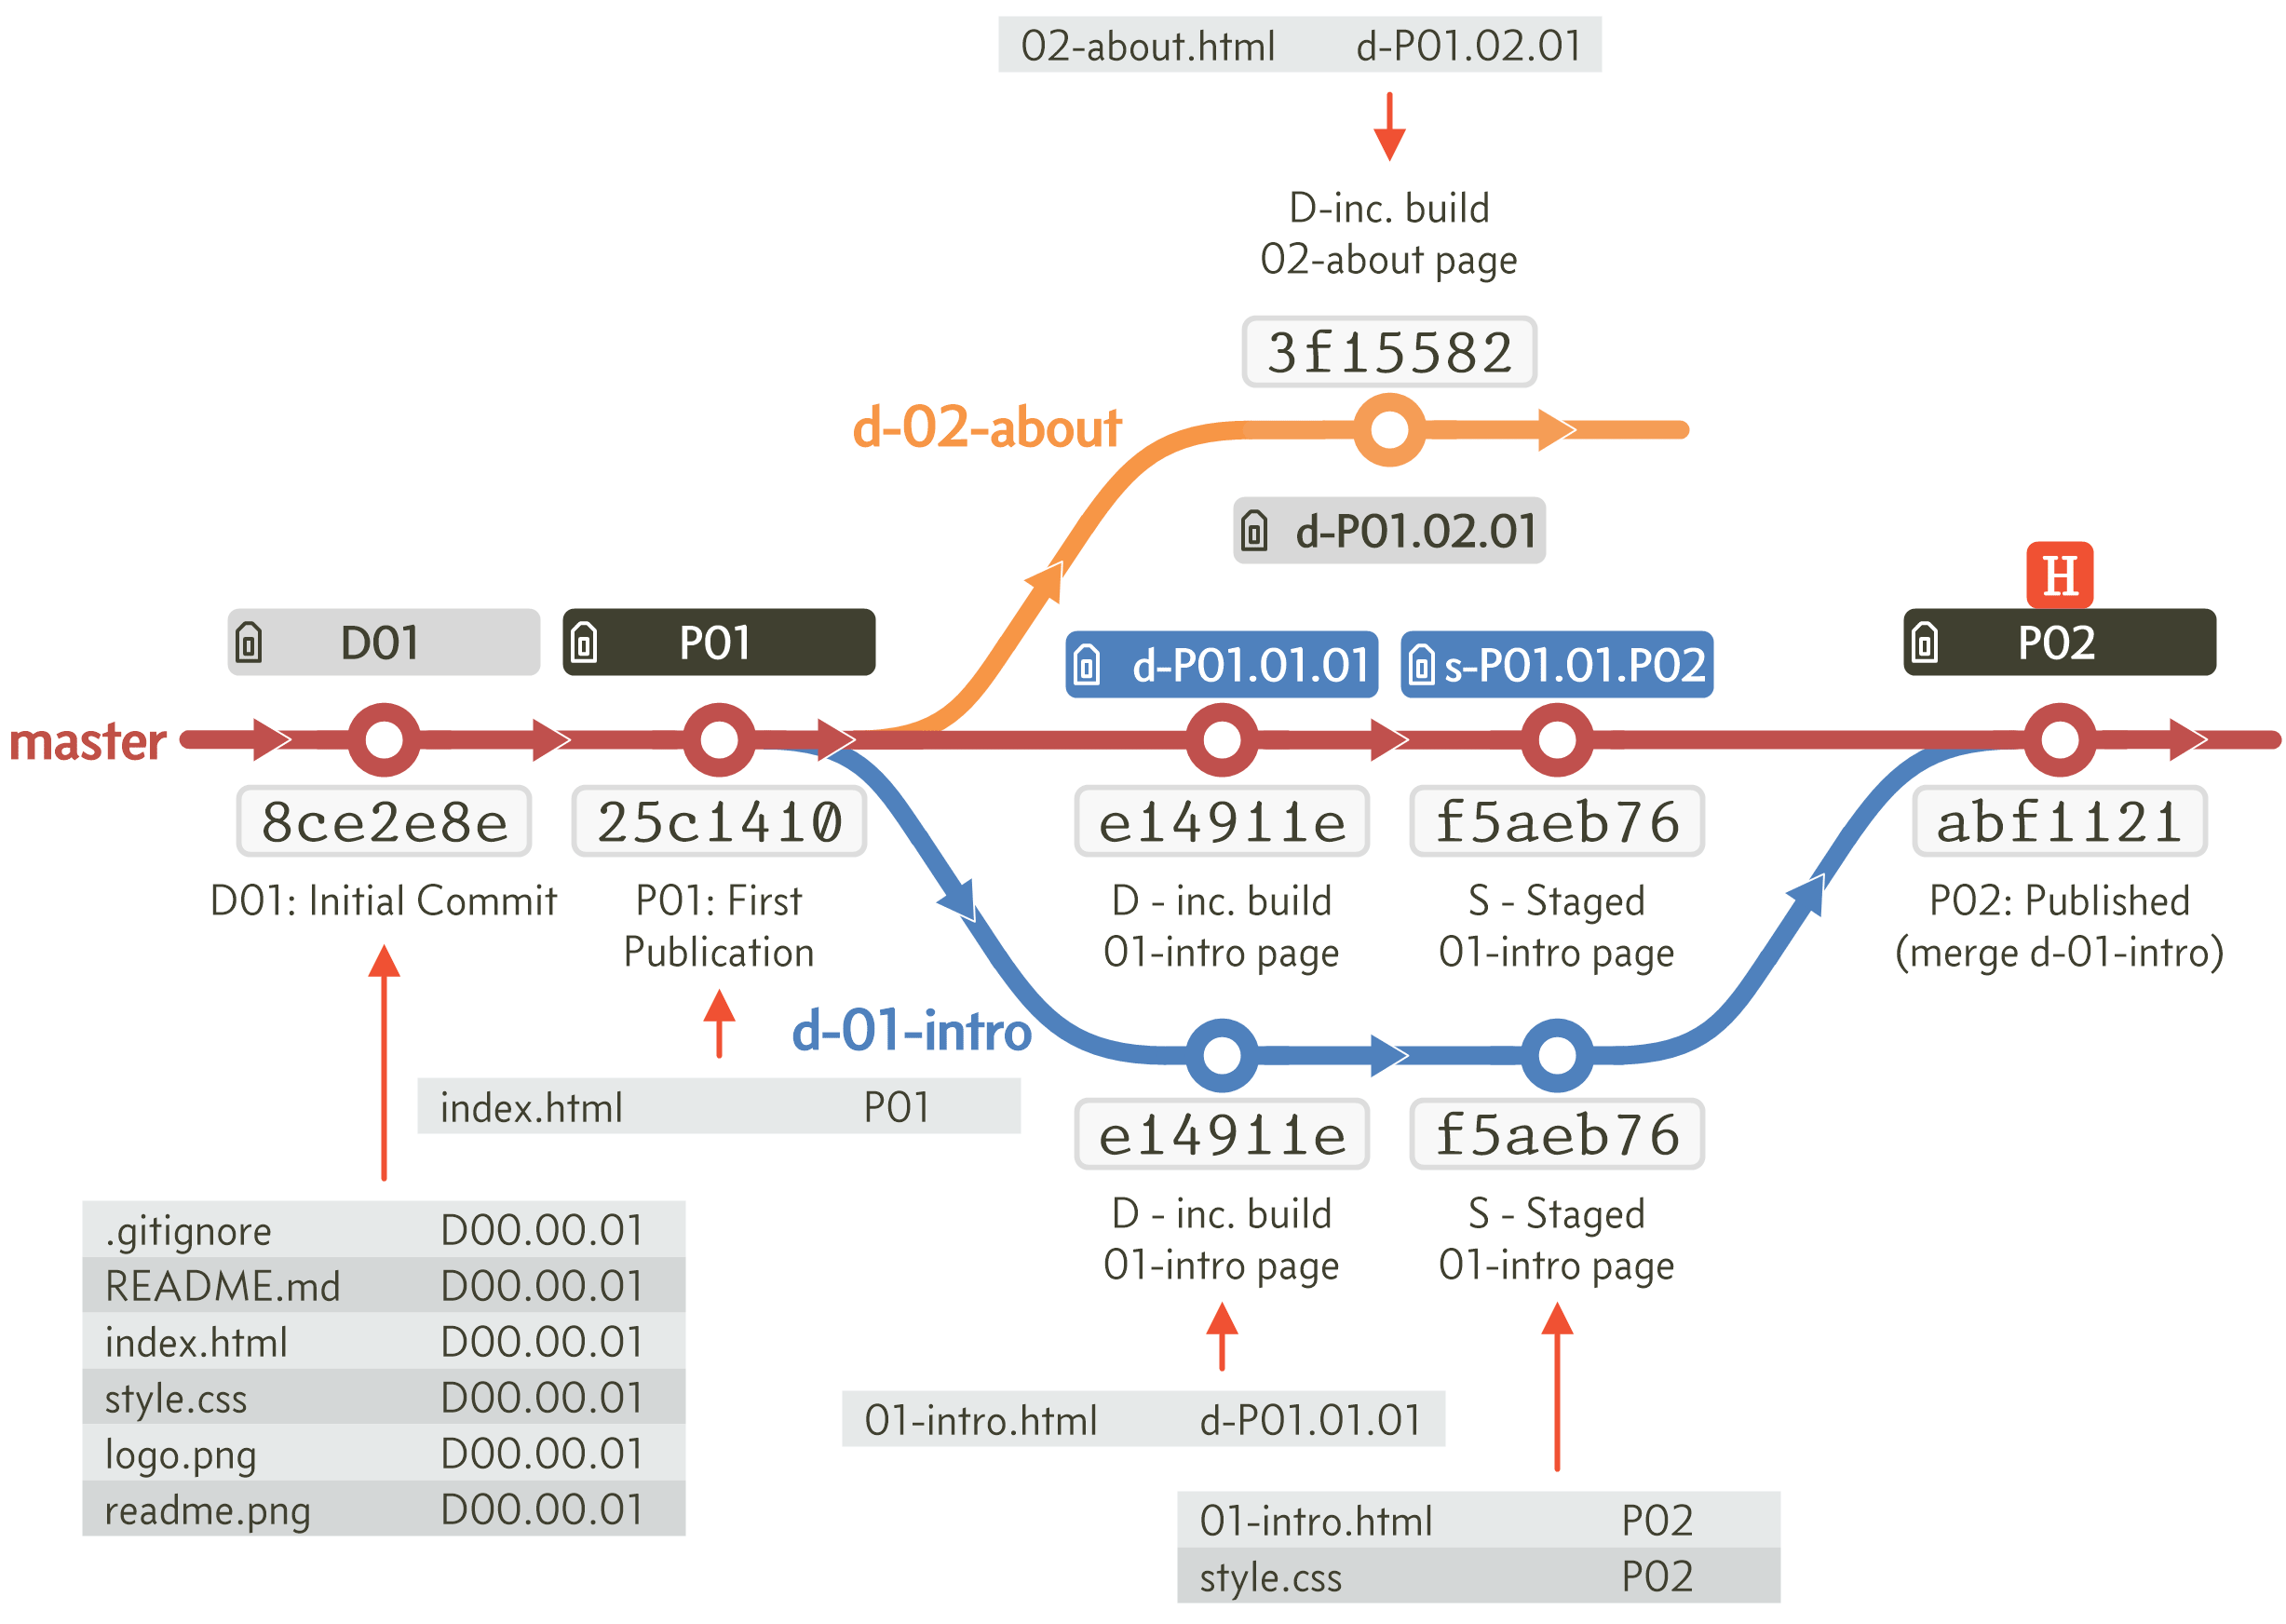 Figure 6.69 - Workflow after d-01-intro merge